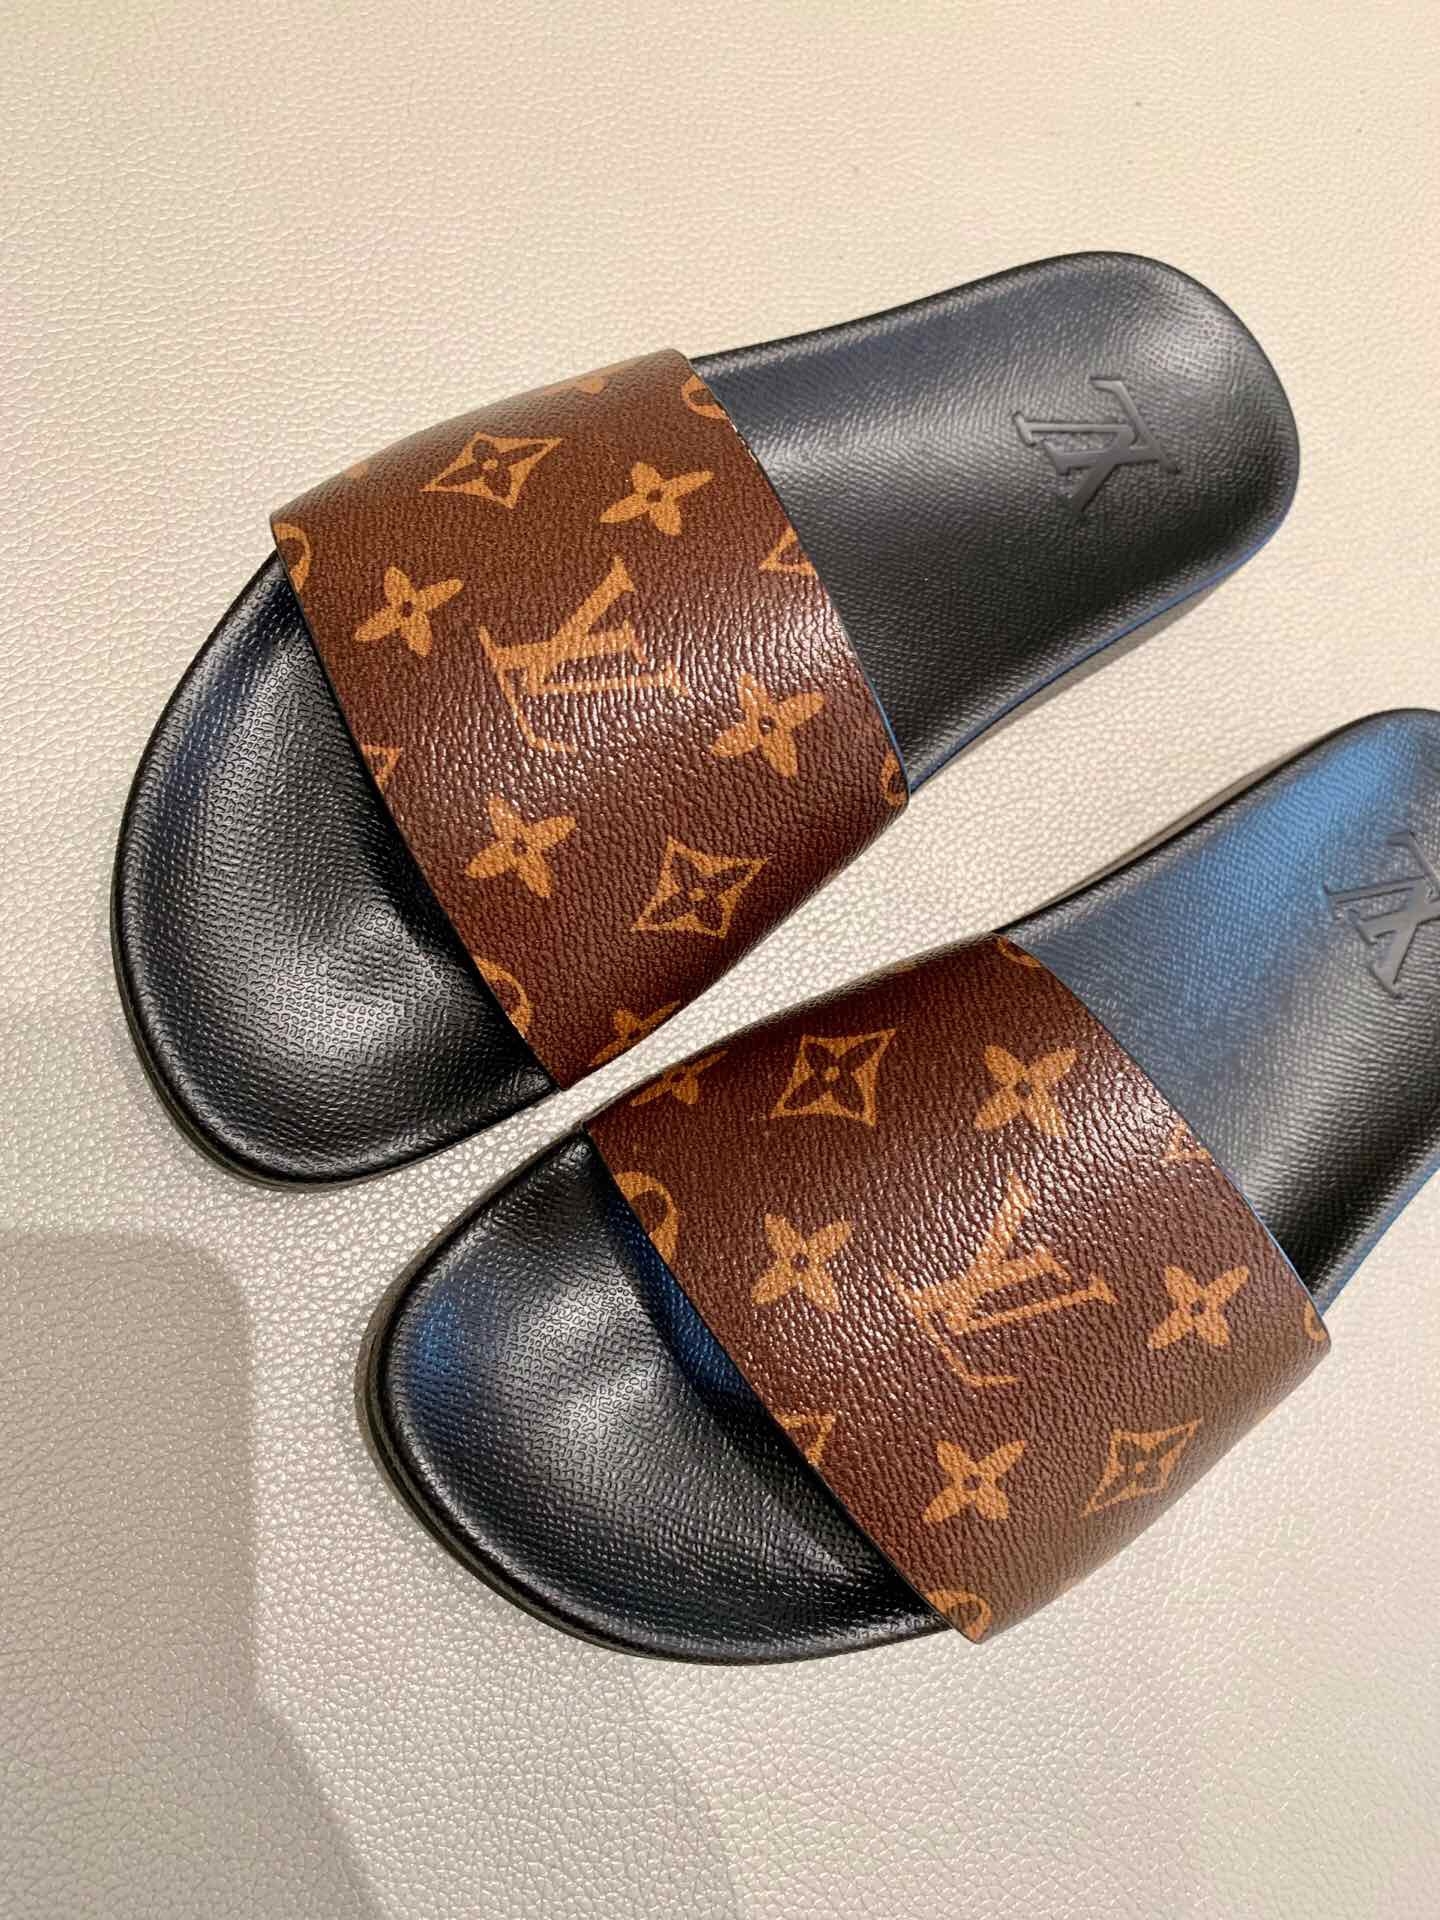 Louis Vuitton Slippers Price In South Africa's | semashow.com